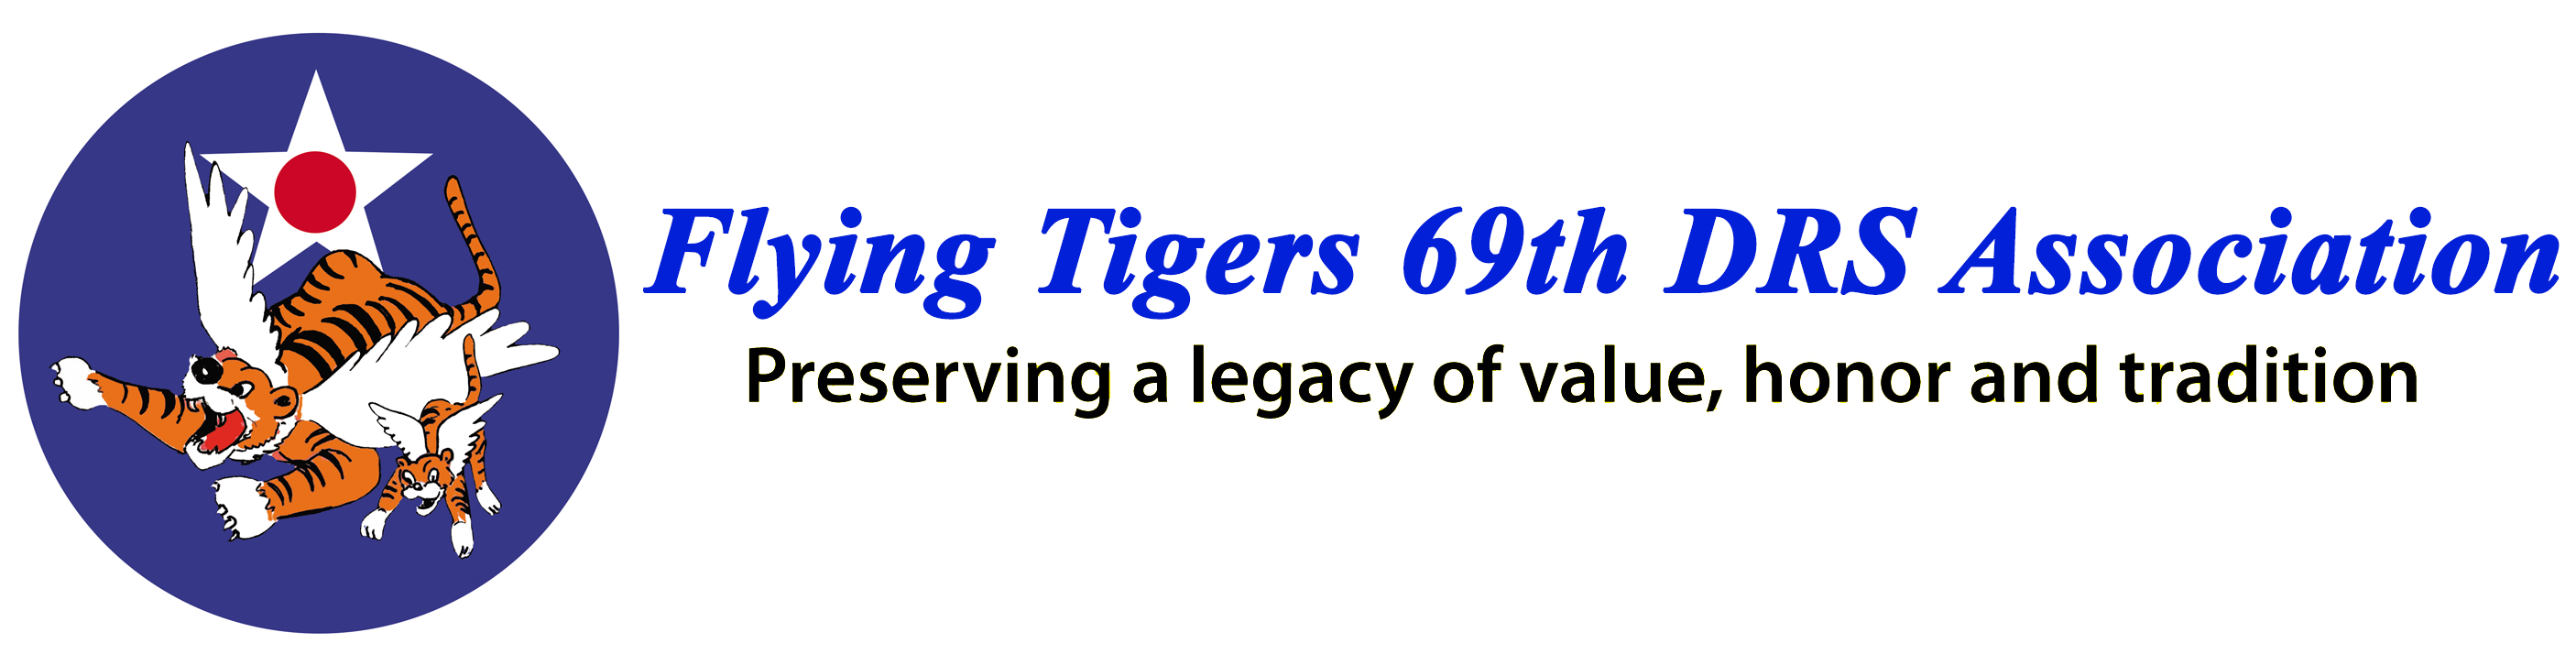 Flying Tigers 69th DRS Association